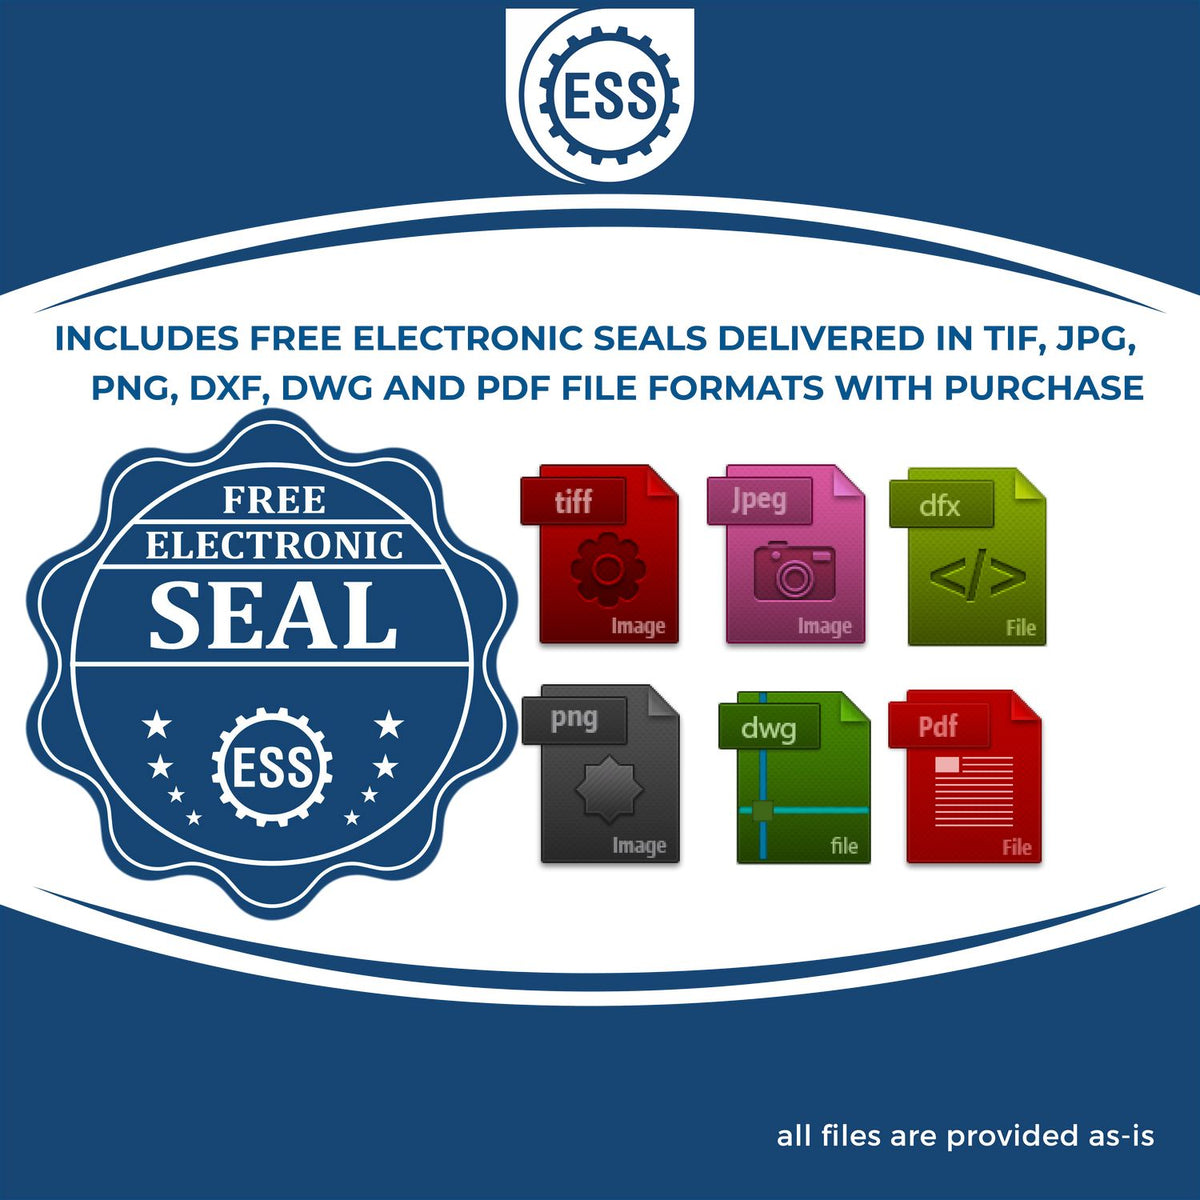 An infographic for the free electronic seal for the Hybrid Kansas Land Surveyor Seal illustrating the different file type icons such as DXF, DWG, TIF, JPG and PNG.